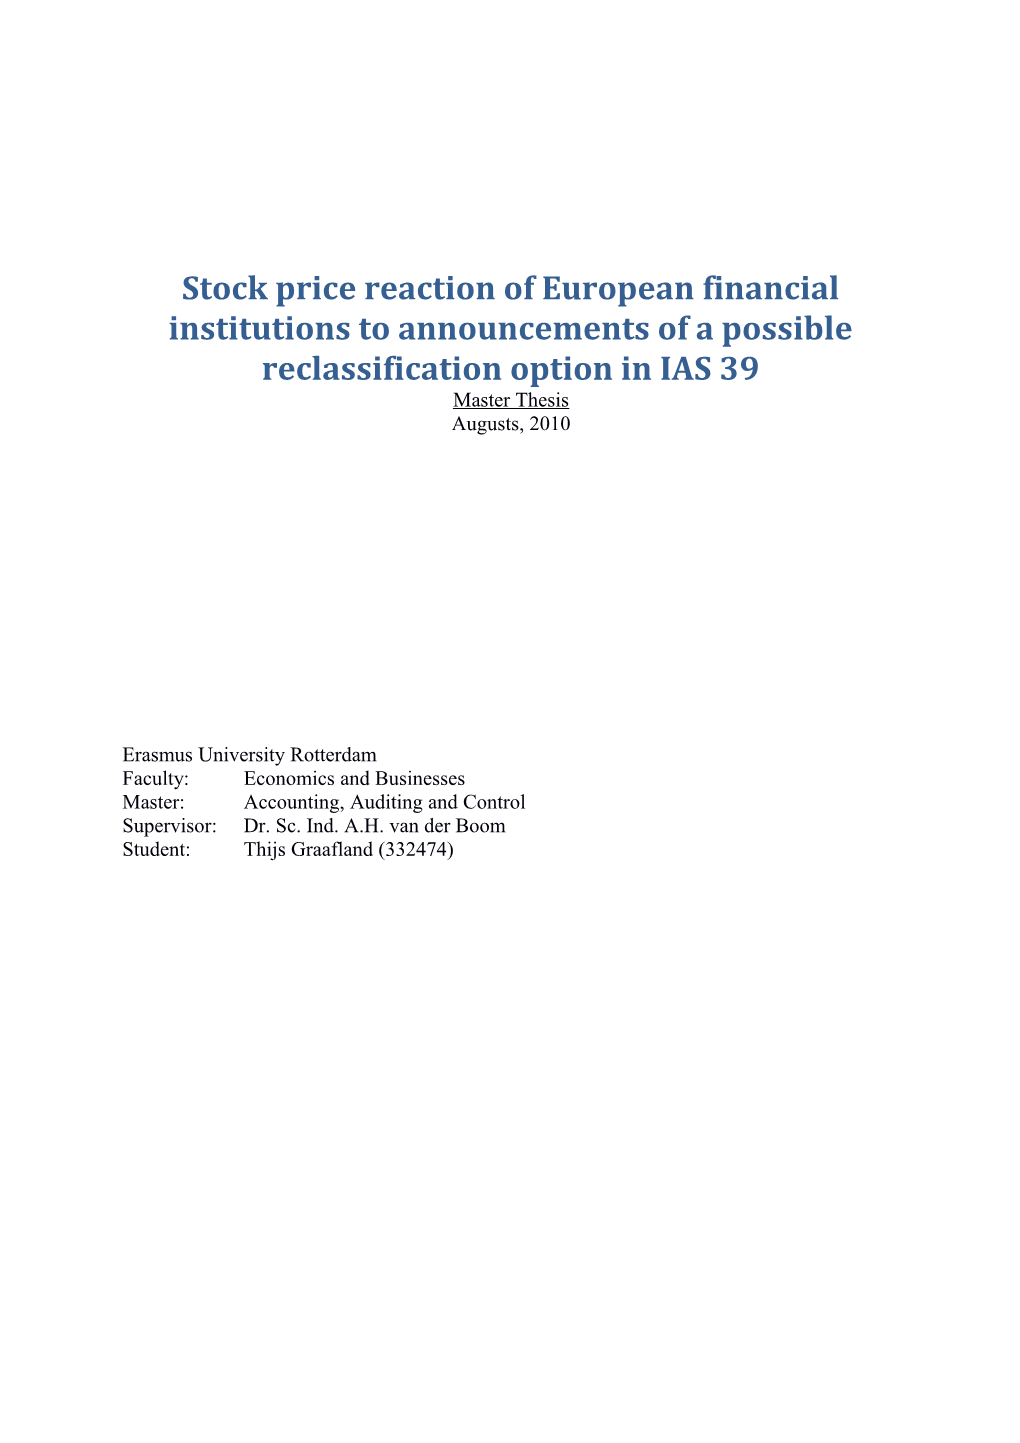 Stock Price Reactionof European Financial Institutions to Announcements of a Possible